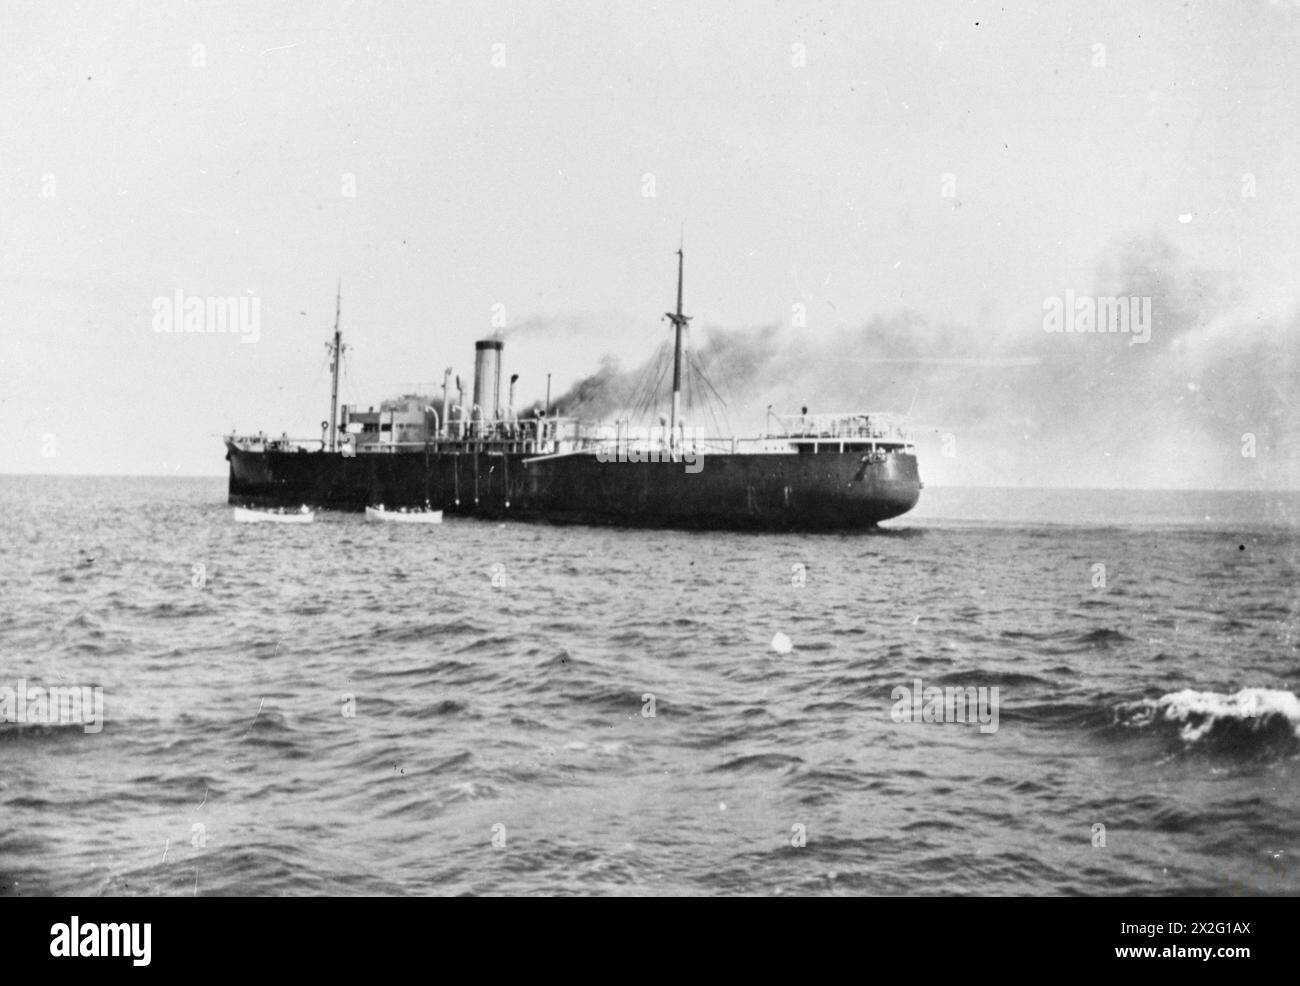 THE INTERCEPTION AND SCUTTLING OF THE GERMAN SS IDARWALD. 8 AND 9 DECEMBER 1940, ON BOARD A BRITISH WARSHIP OFF CUBA. THE GERMAN HAMBURG-AMERIKA FREIGHTER IDARWALD WAS INTERCEPTED BY A PATROLLING BRITISH WARSHIP OFF CUBA. THE GERMAN CREW AT ONCE SCUTTLED THEIR SHIP, SET FIRE TO HER, AND TOOK TO THEIR BOATS. THE BRITISH SHIP FOUGHT THE FIRE AND TOOK THE IDARWALD IN TOW, BUT SHE HAD TO BE CAST OFF SHORTLY THEREAFTER AND SANK. - The IDARWALD is well on fire amidships as the boats pull away from the abandoned ship Stock Photo